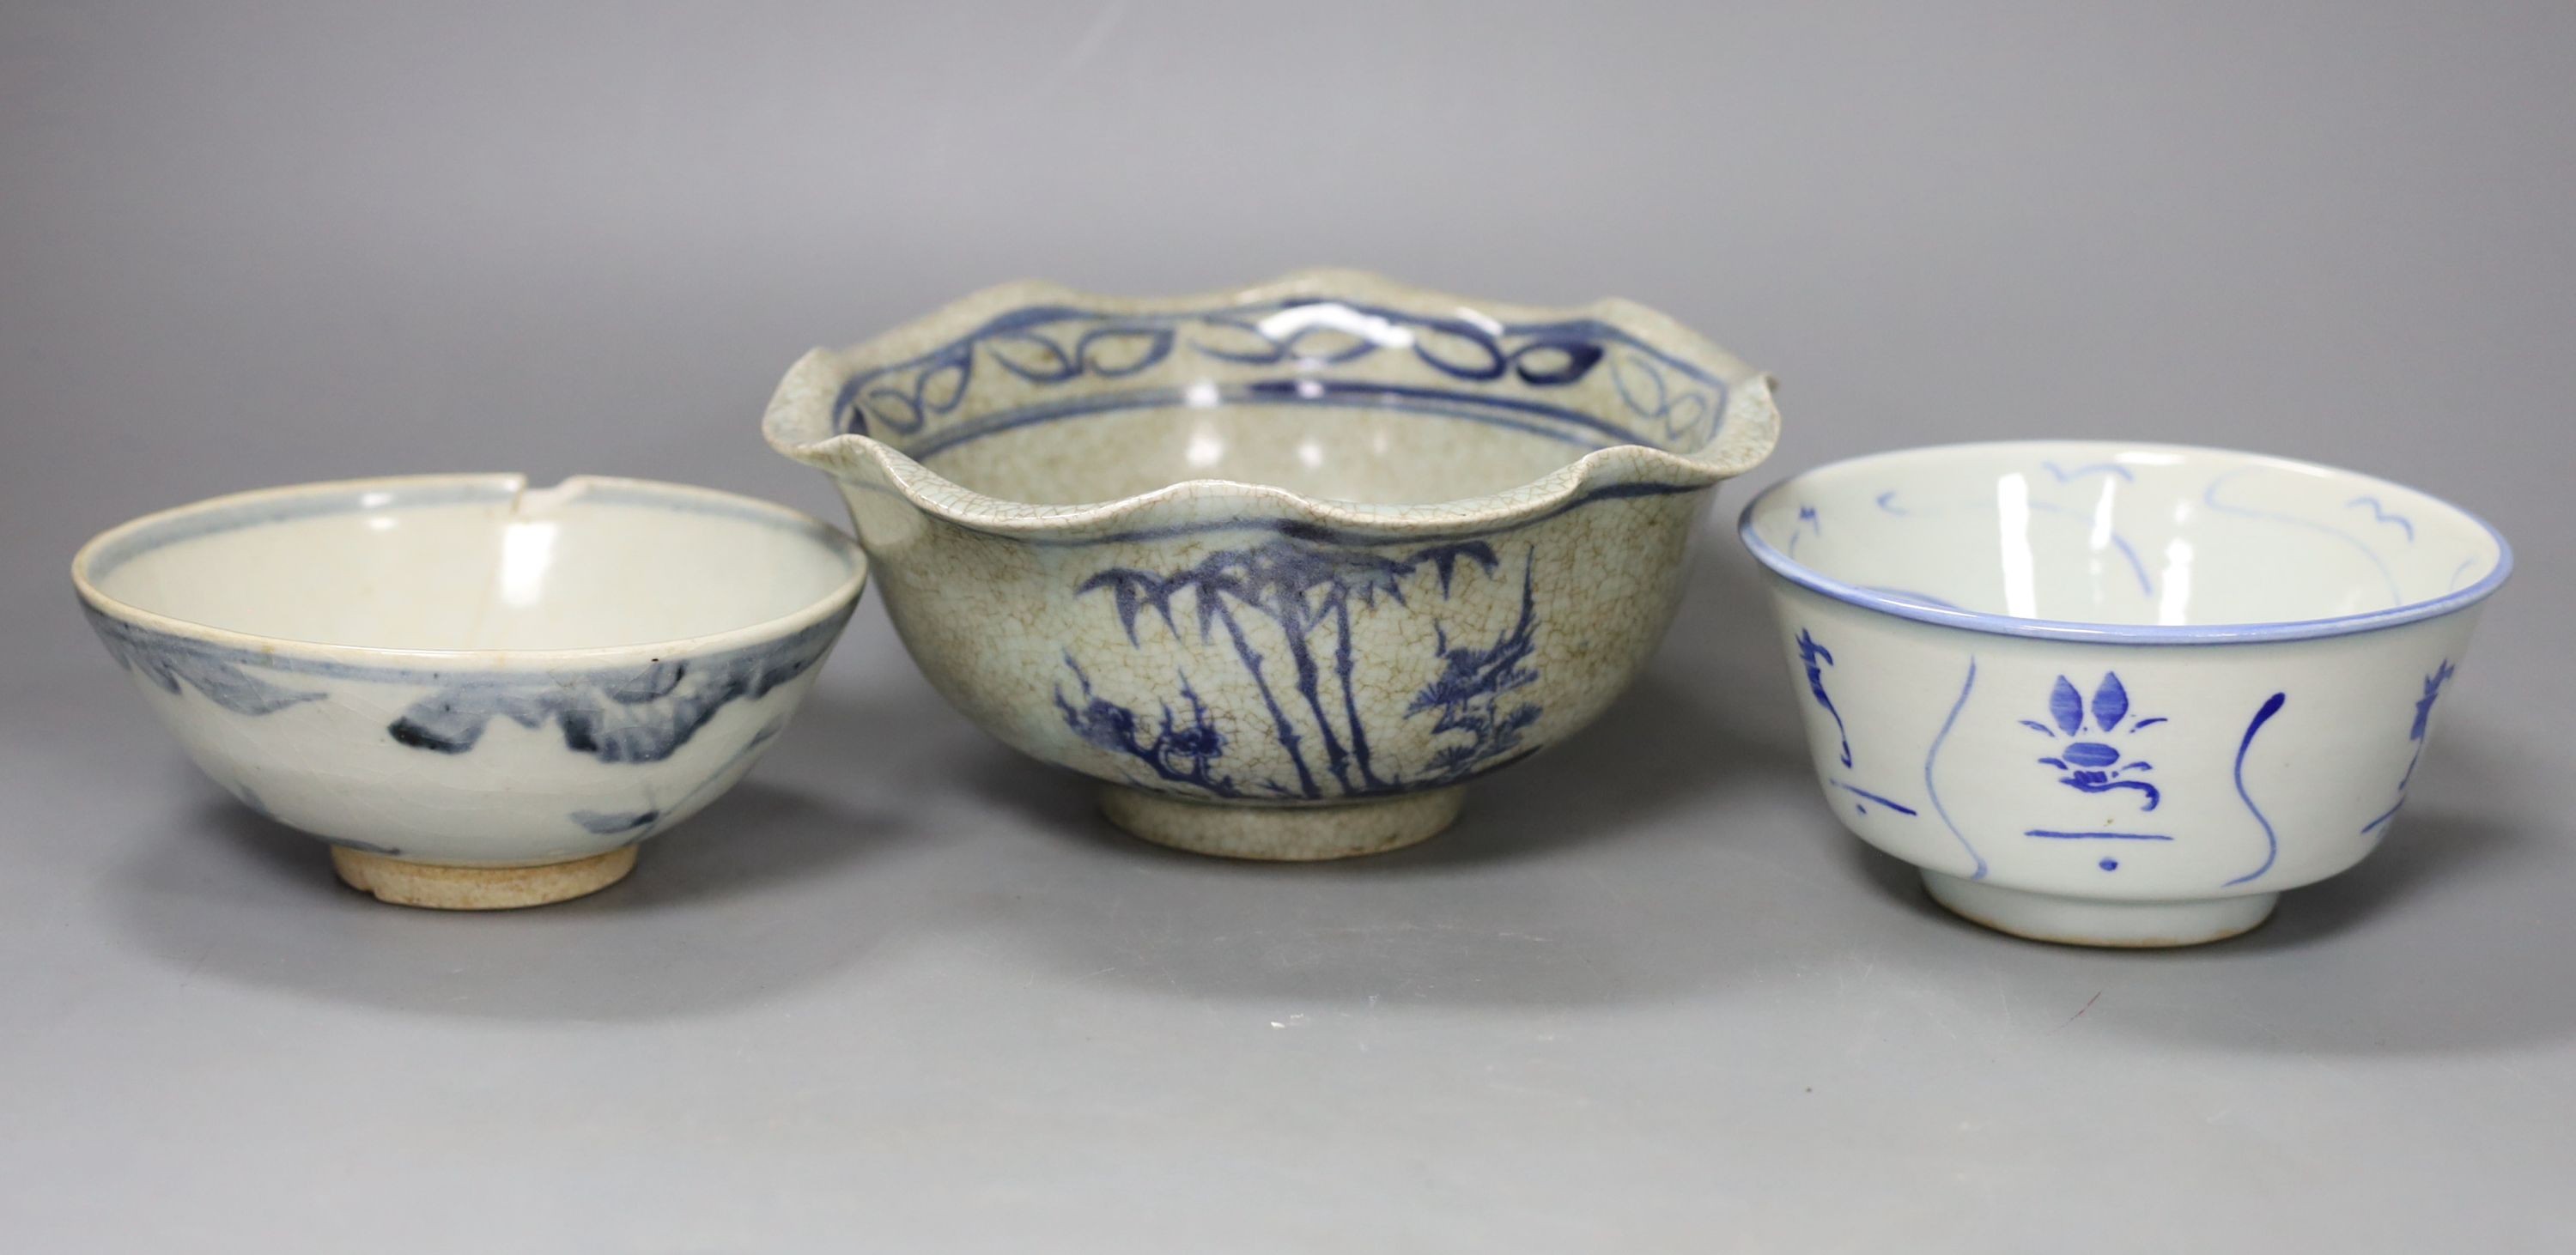 Three Chinese porcelain blue and white bowls, largest 17cm. diam.